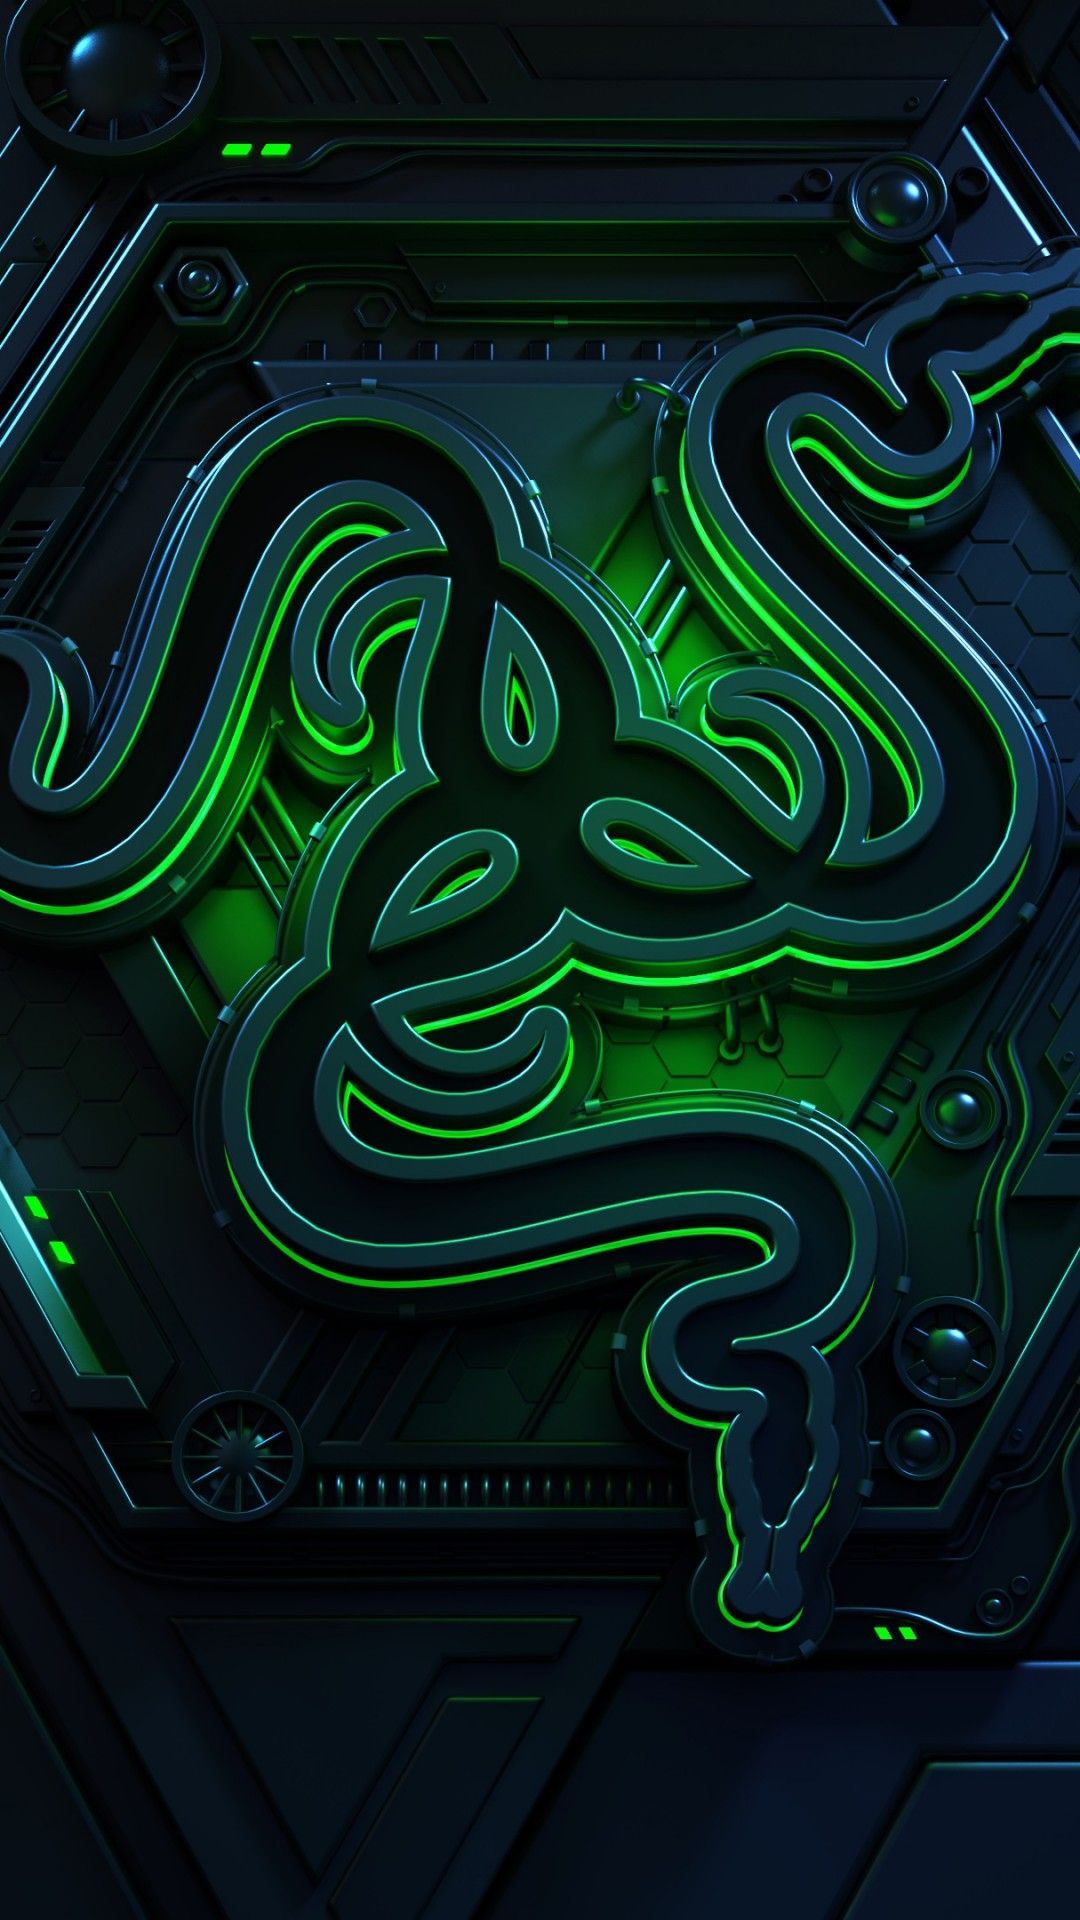 Razer Wallpaper Picture Hupages Download iPhone Wallpaper. Phone wallpaper design, Mobile wallpaper, Game wallpaper iphone